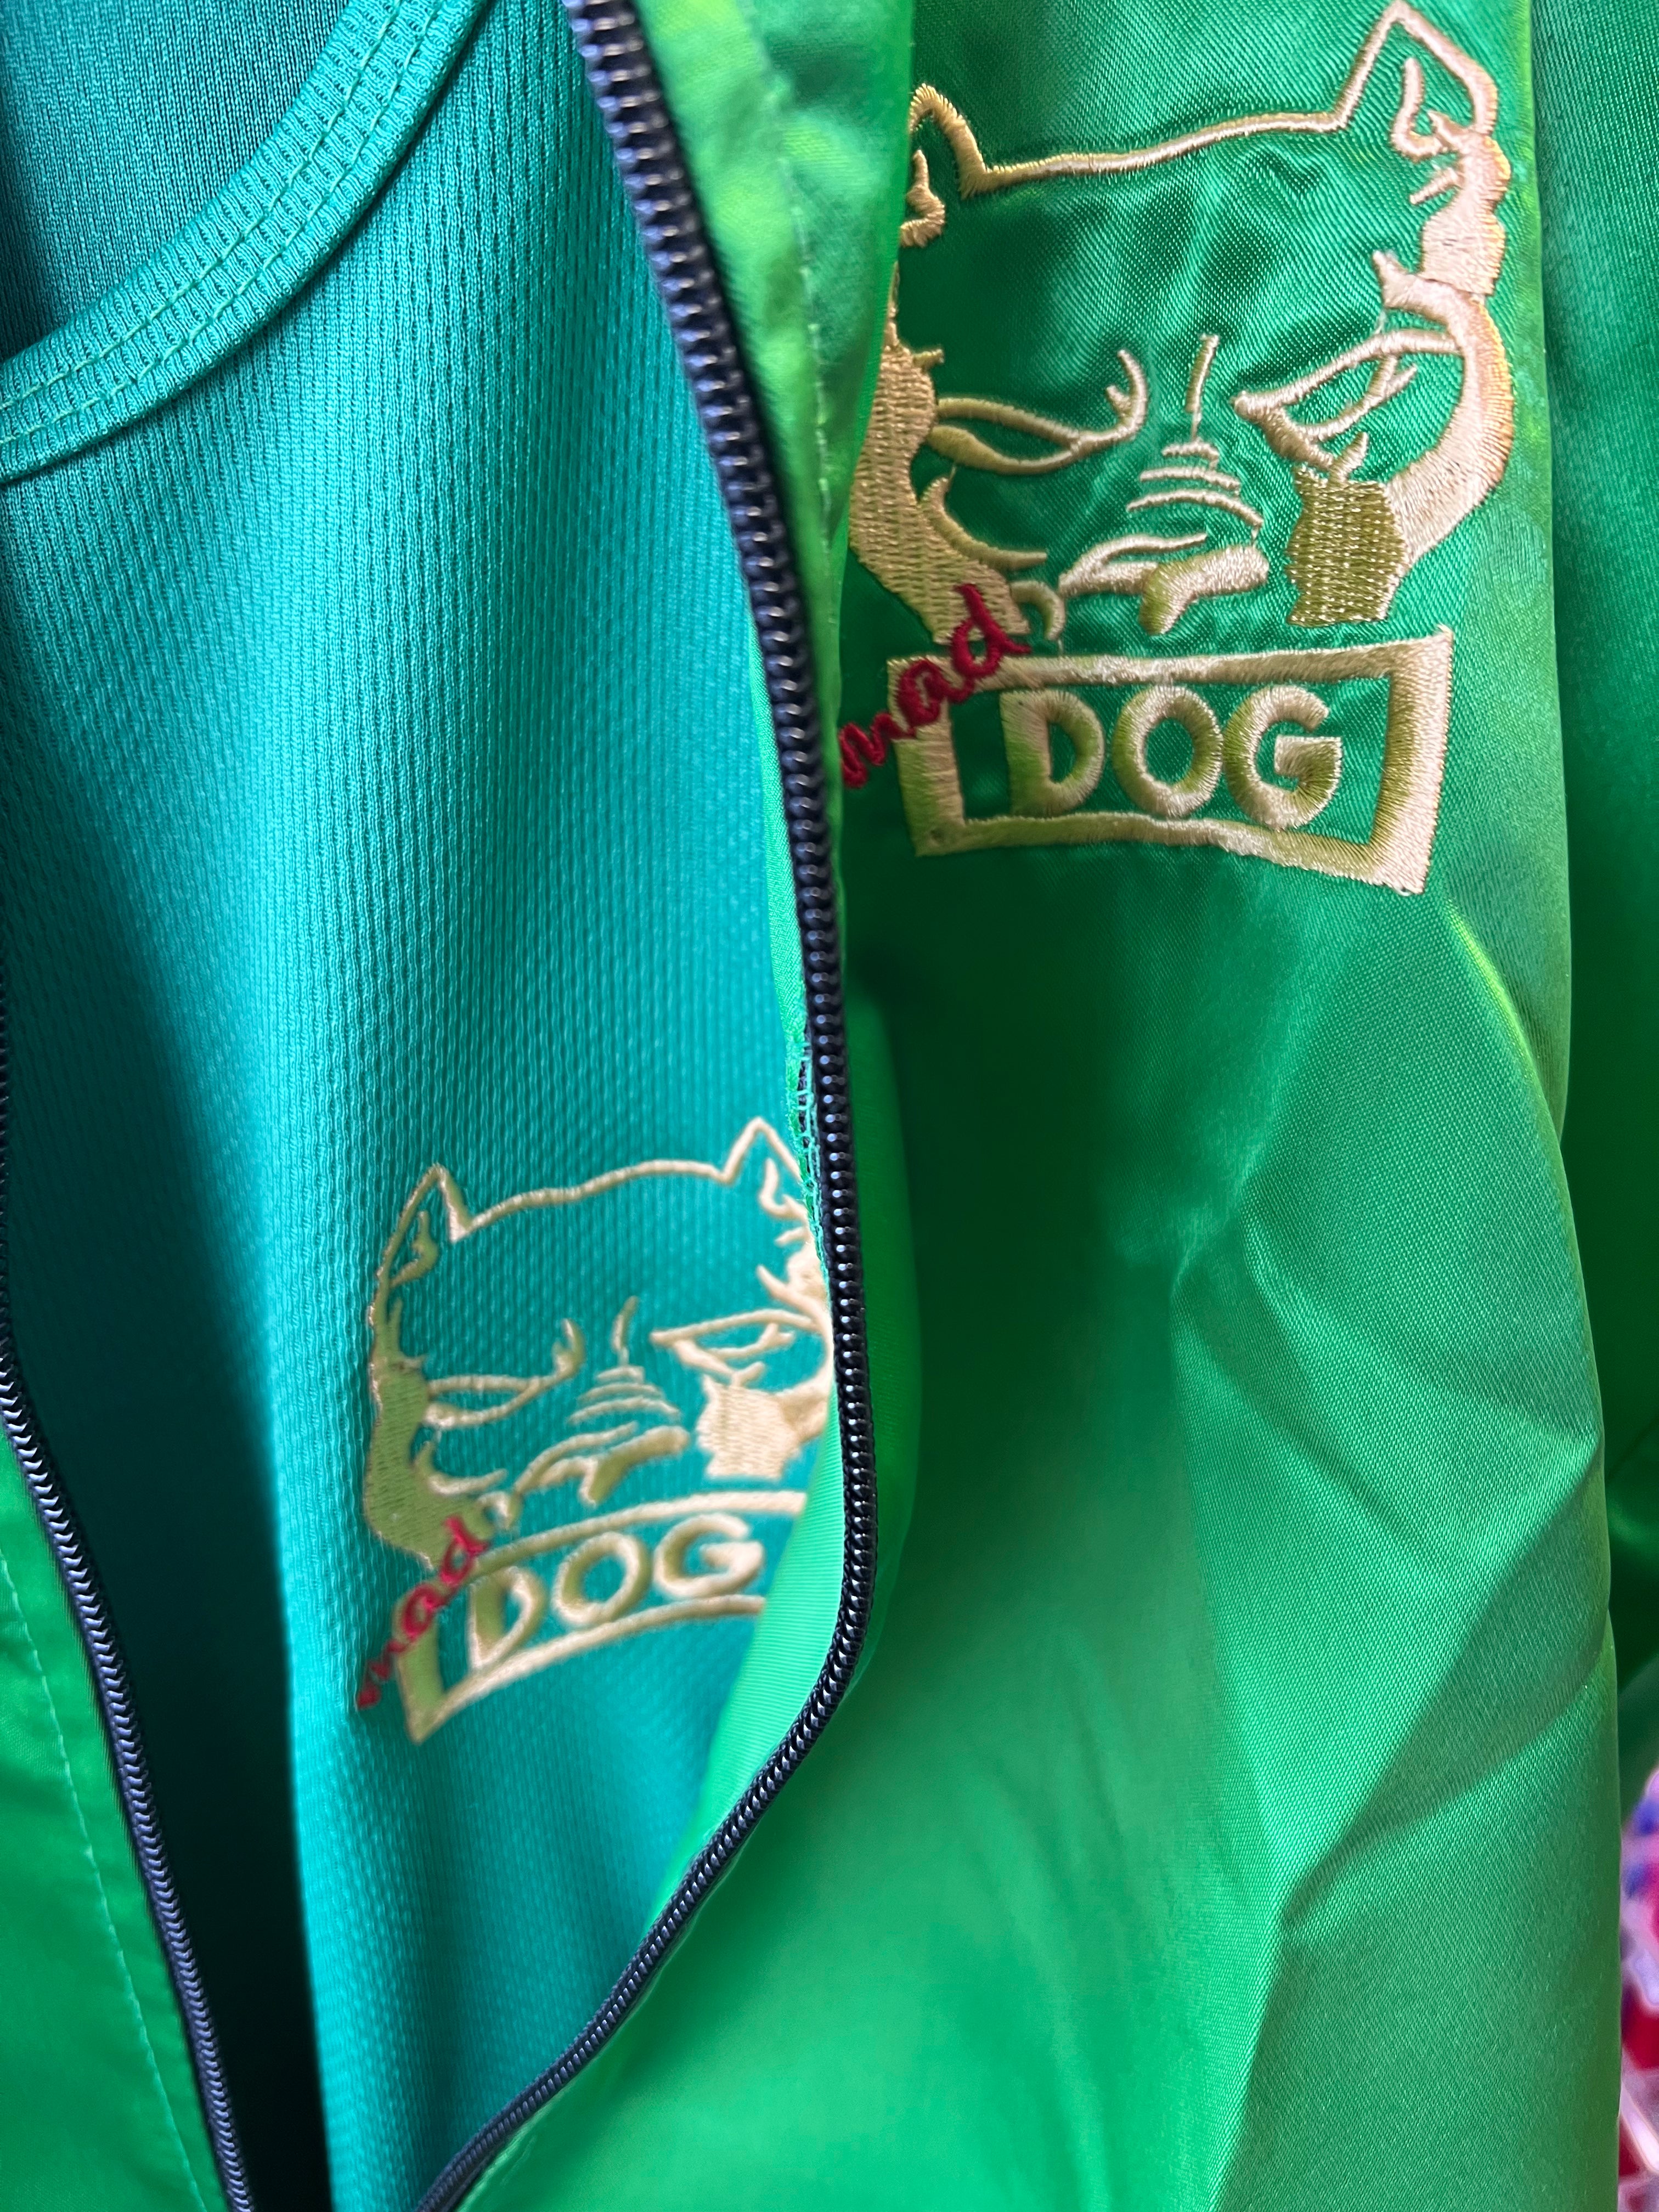 MAD DOG'S RING-WEAR SET GREEN/GOLD